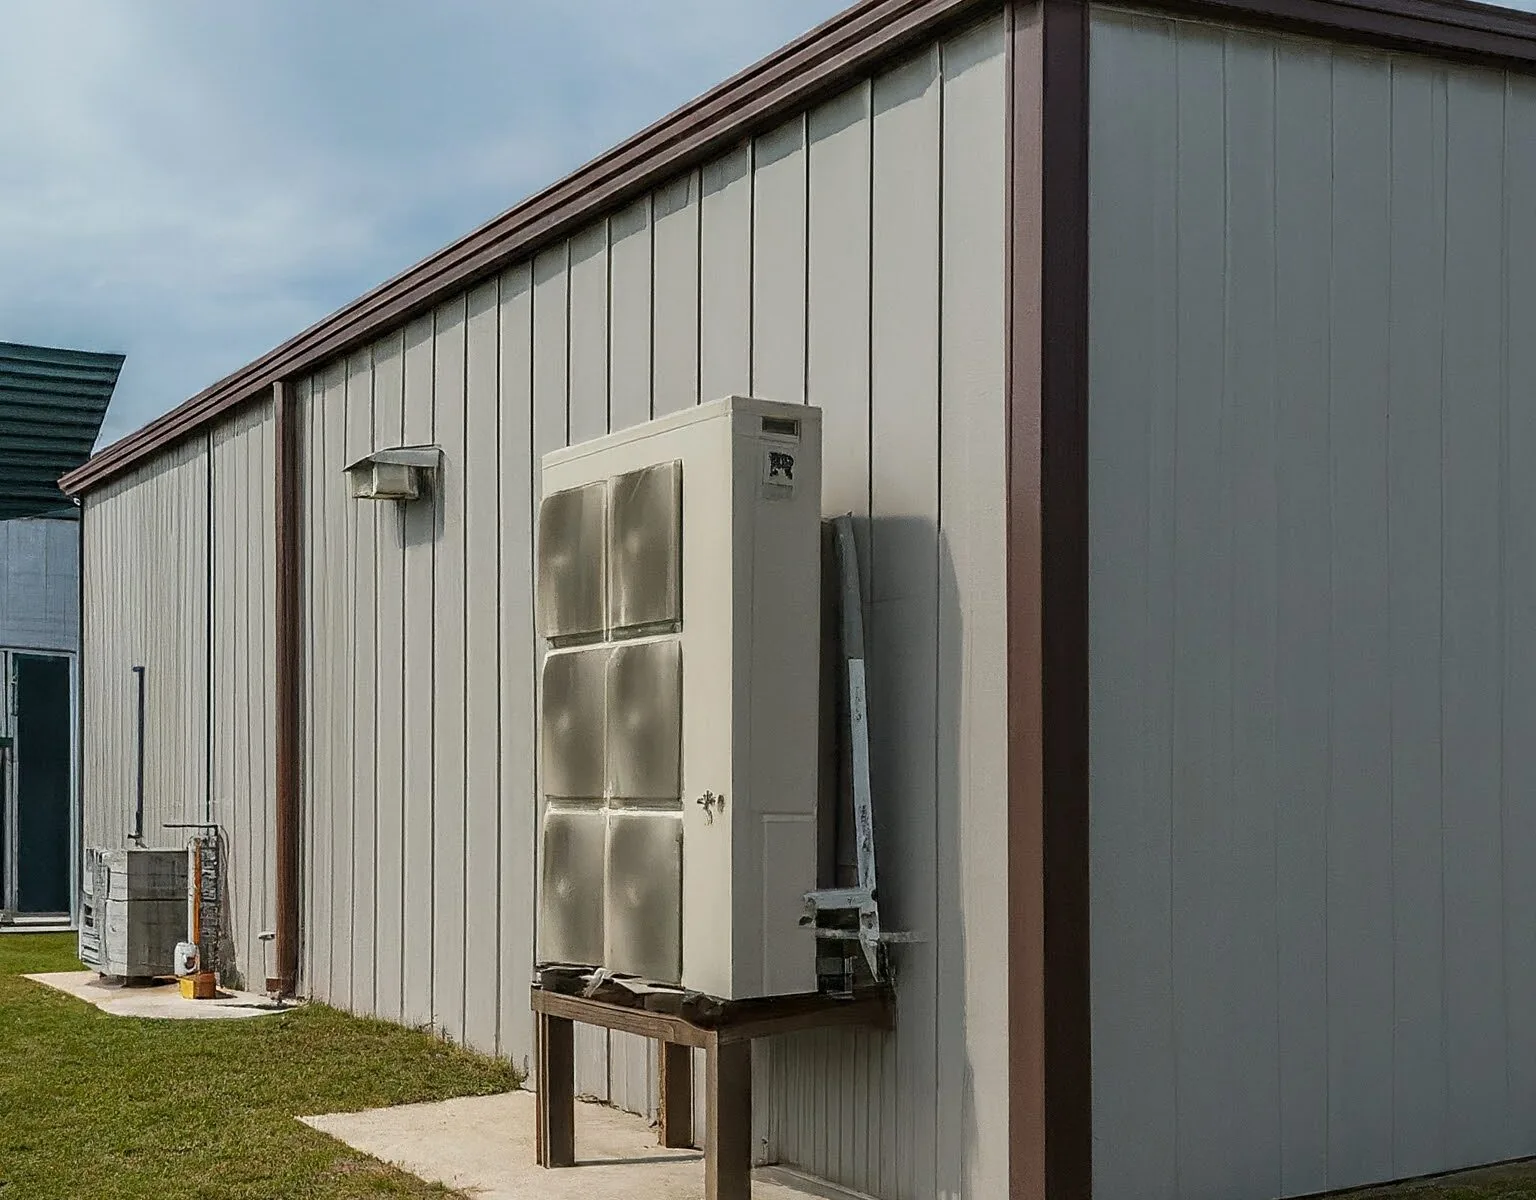 CO2 based heat pump in commercial buildings